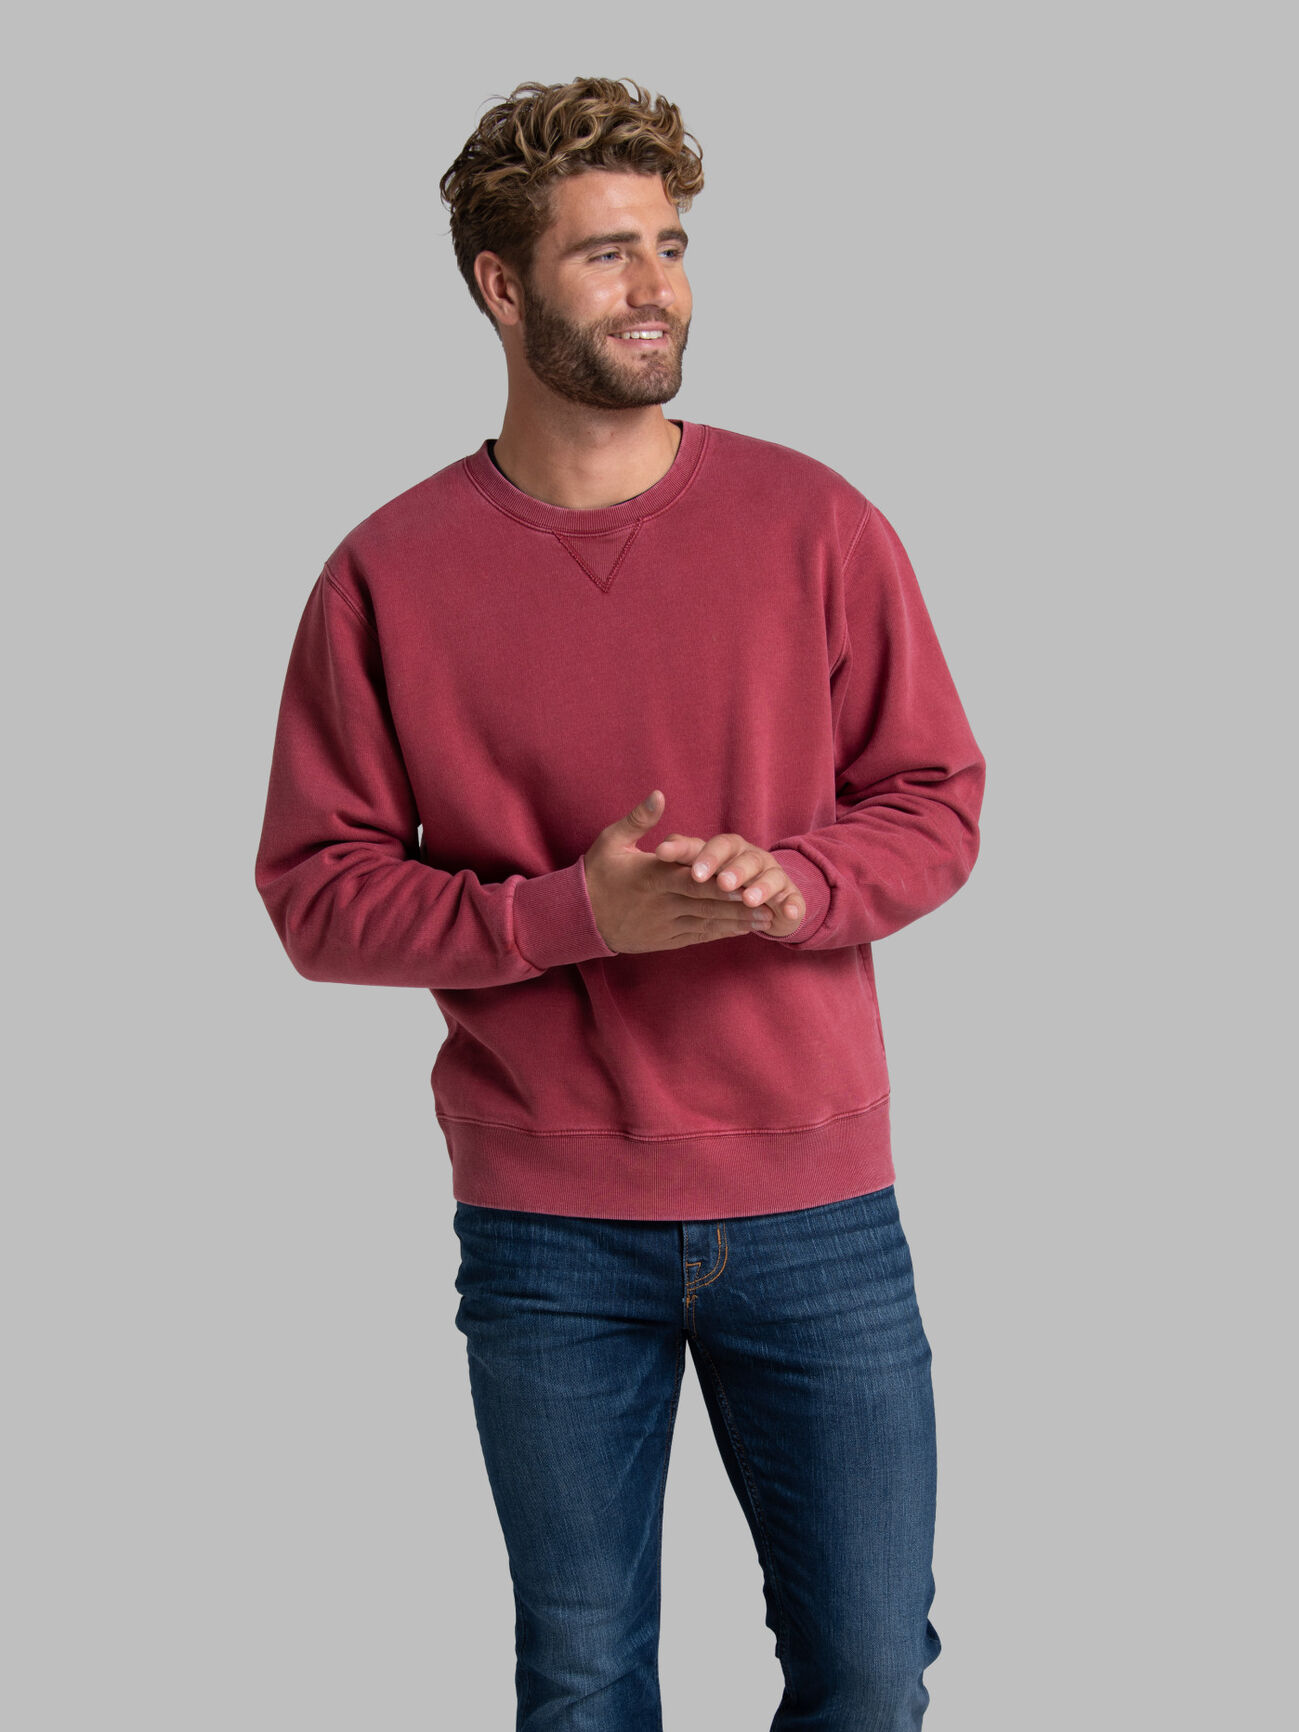 SALE Mens Clothing - Up to 80% OFF - T-Shirts, Hoodies, Pants, Sweaters,  Tanks, Shorts